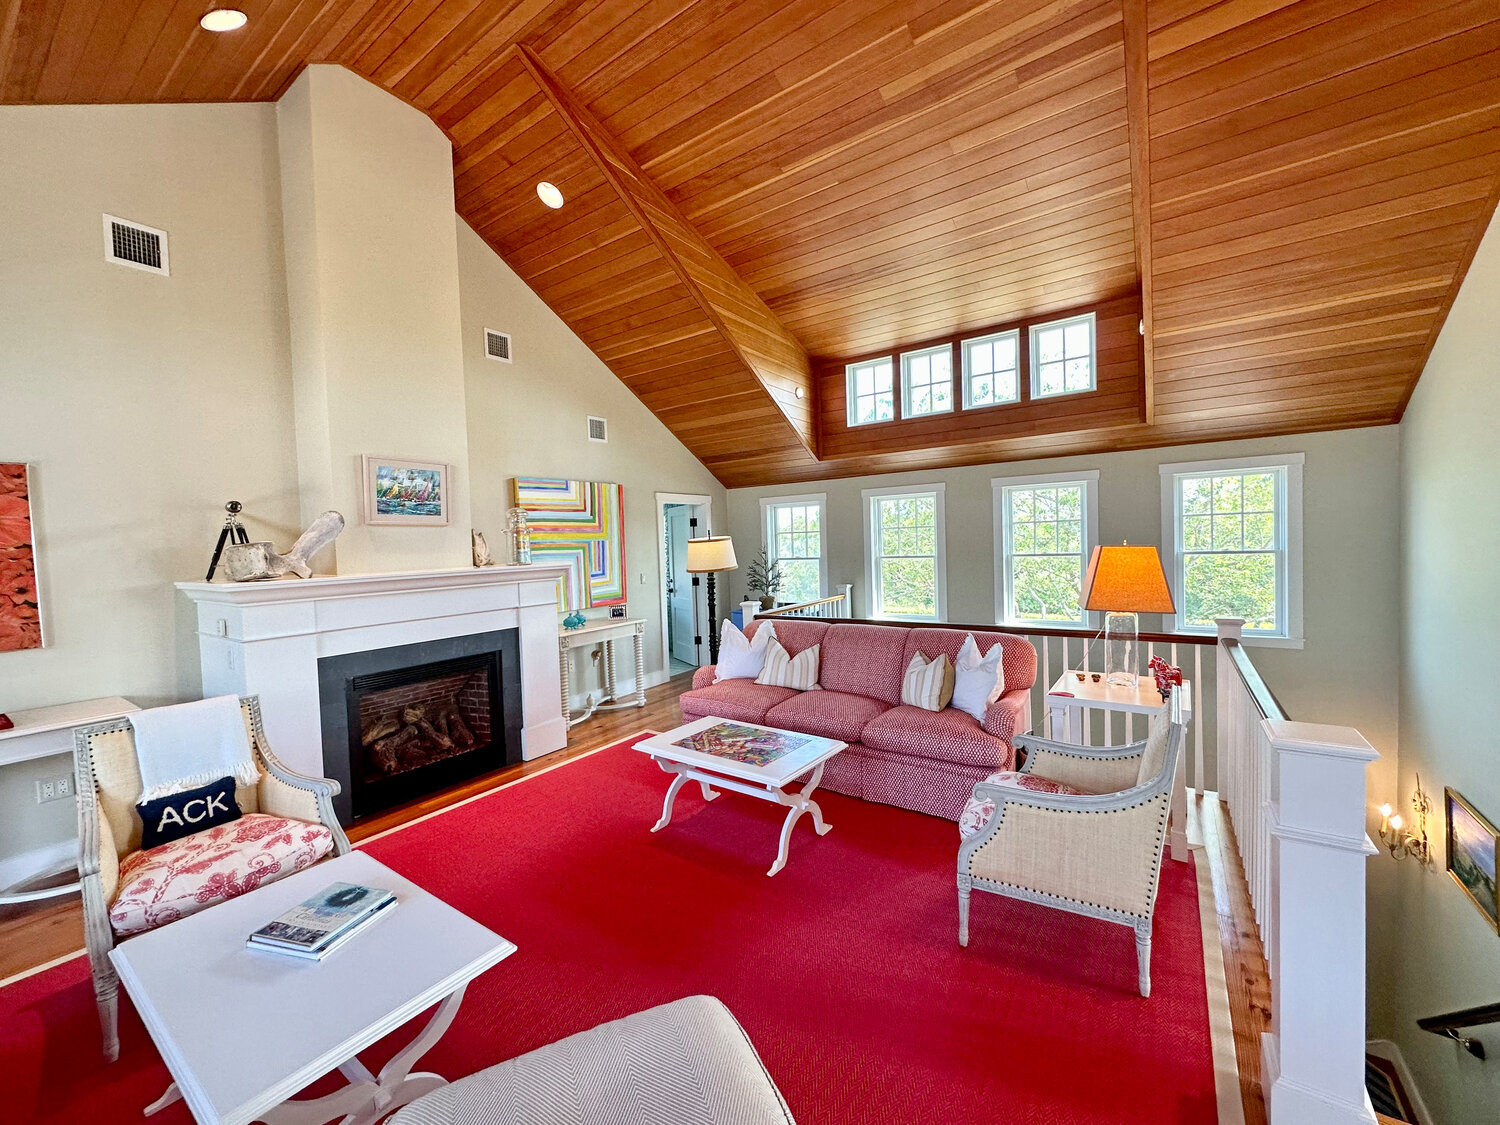 The second-floor living room has a wood-manteled fireplace and cathedral ceiling.